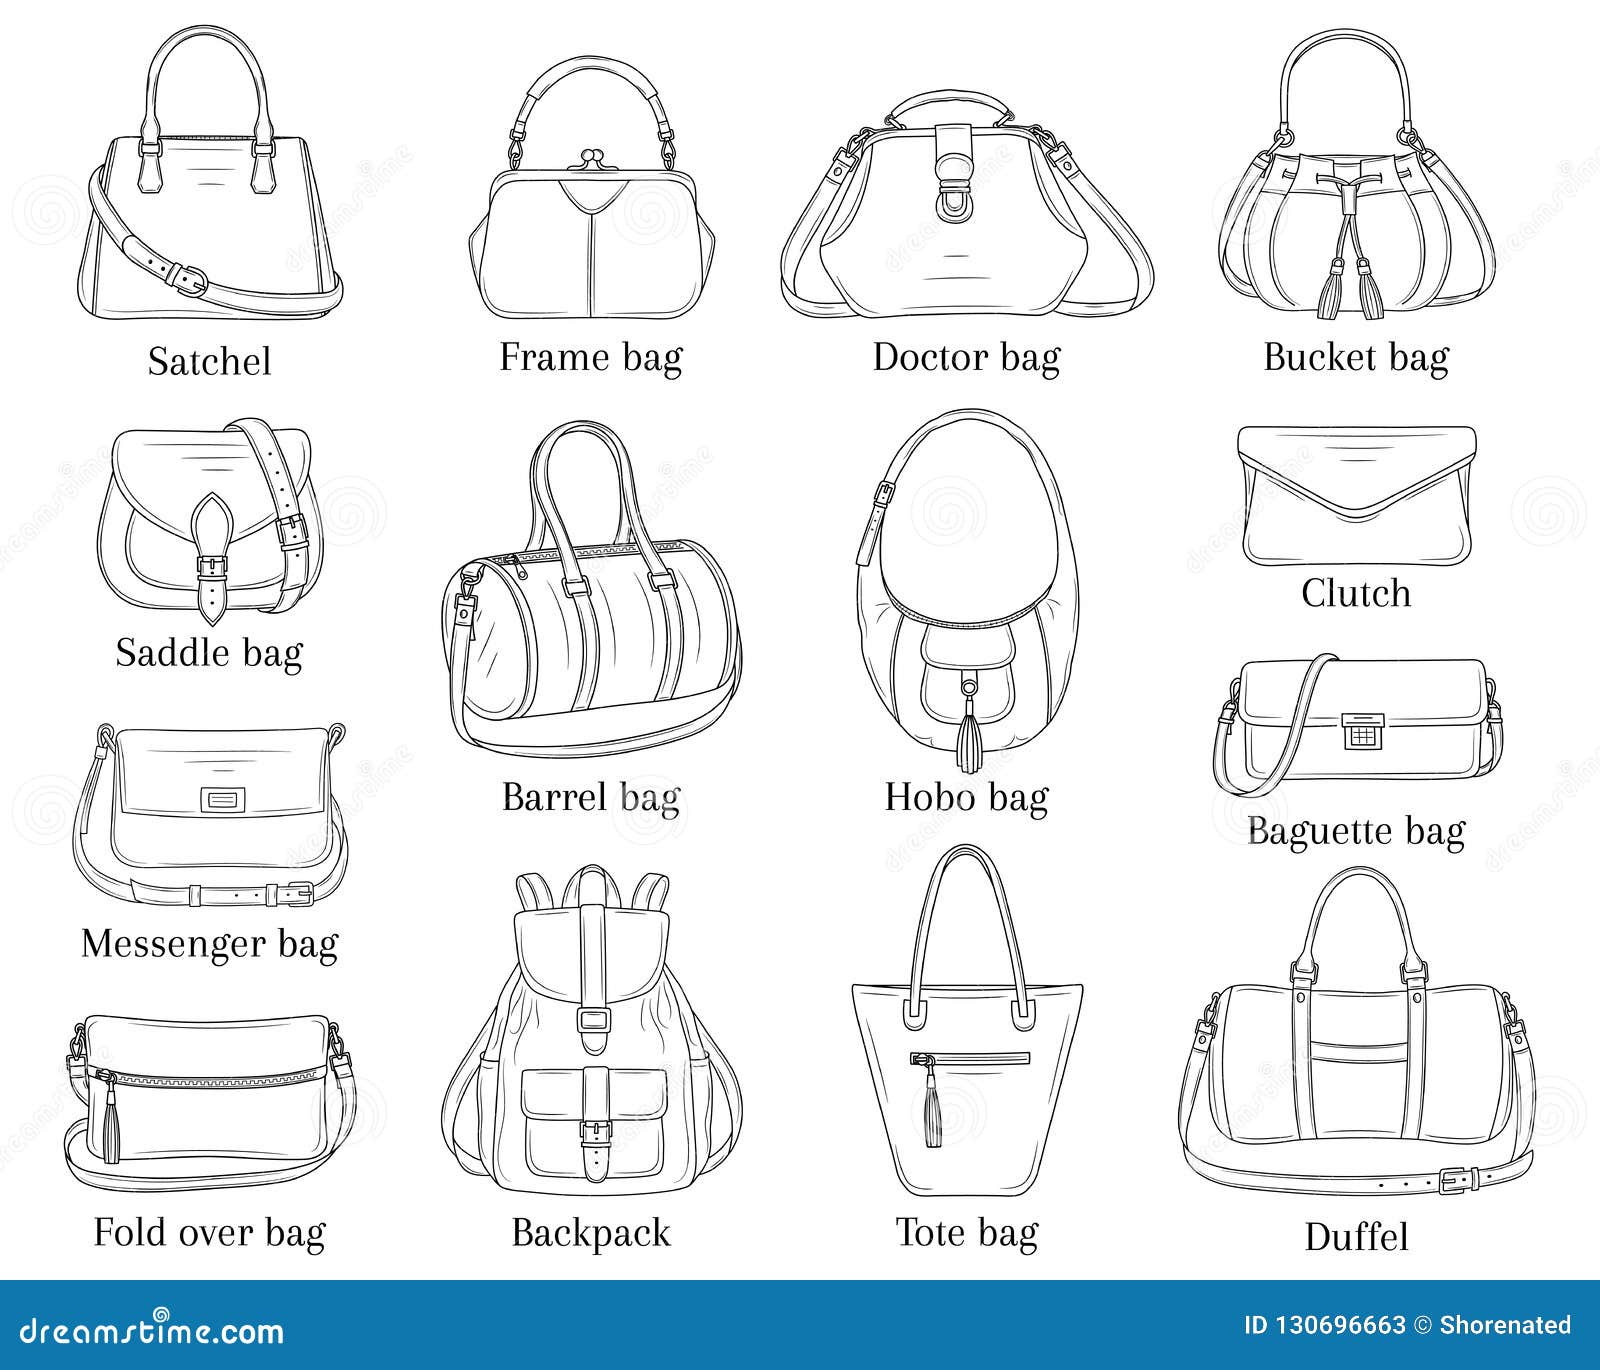 Seven Different Types of Bags you need to know about – Sanskriti777